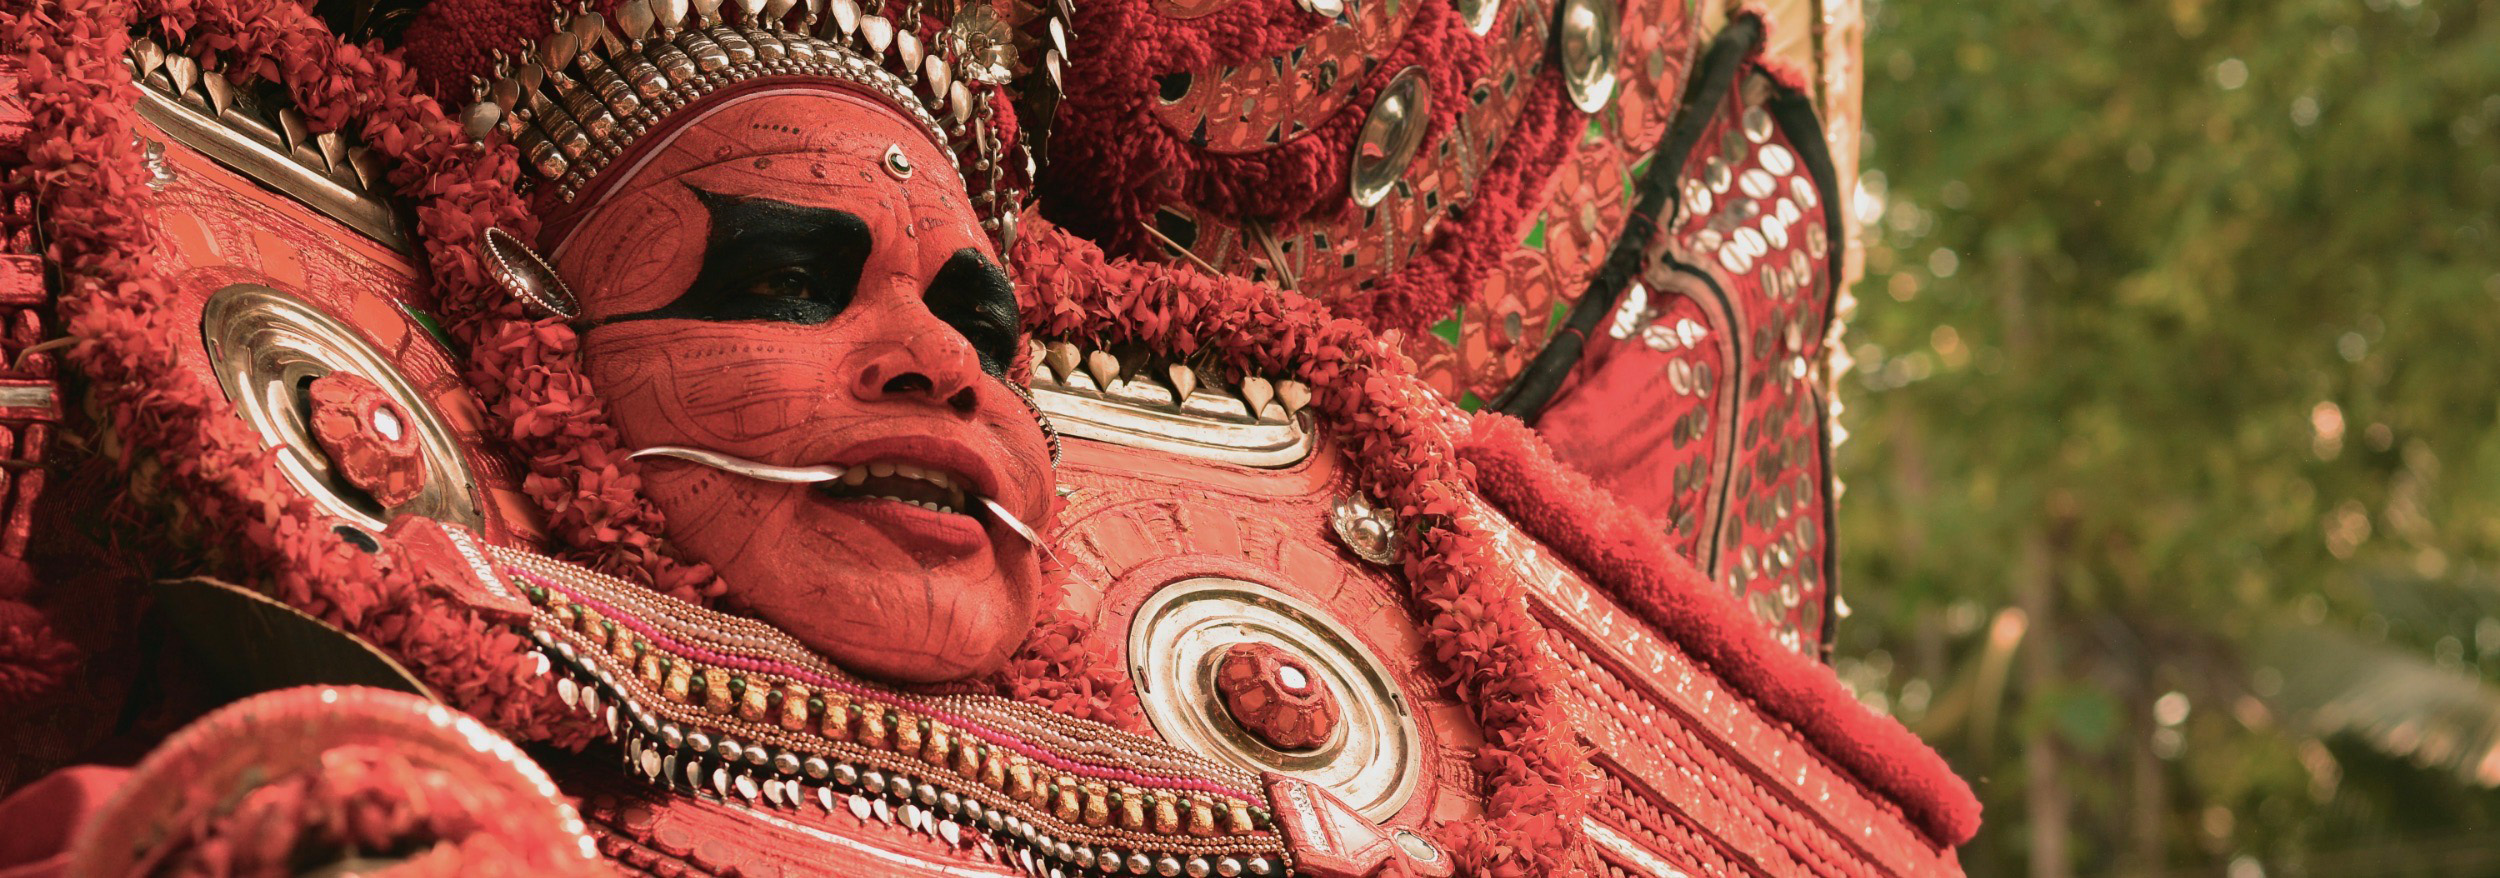 A Theyyam performer dressed in costume, with facial make-up and metal fangs protruding from his mouth.